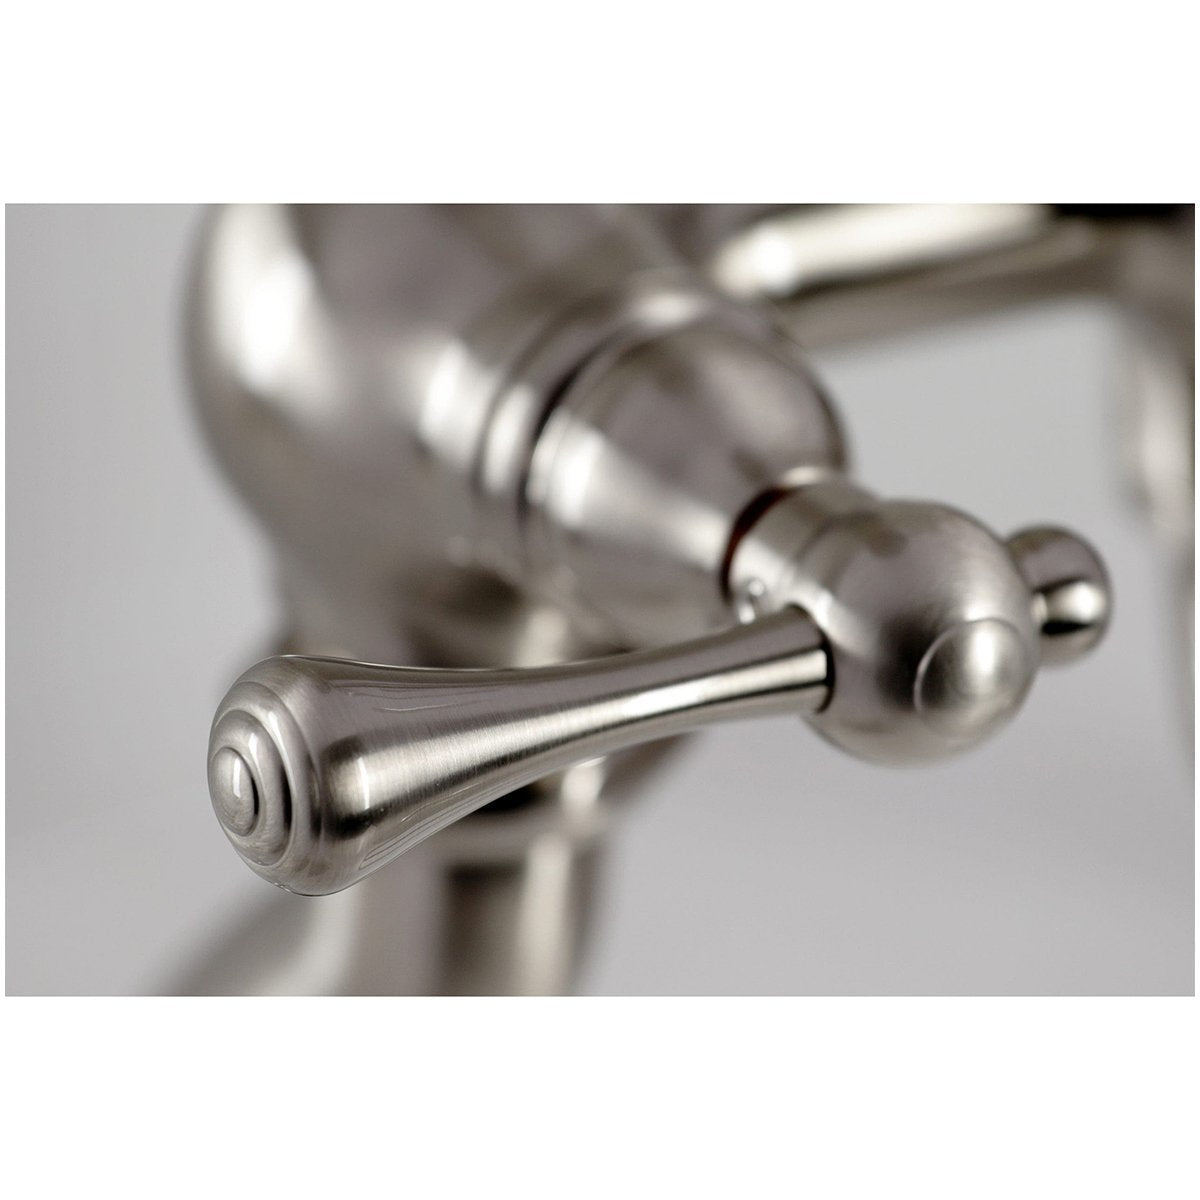 Kingston Brass Clawfoot Tub Faucet with Hand Shower